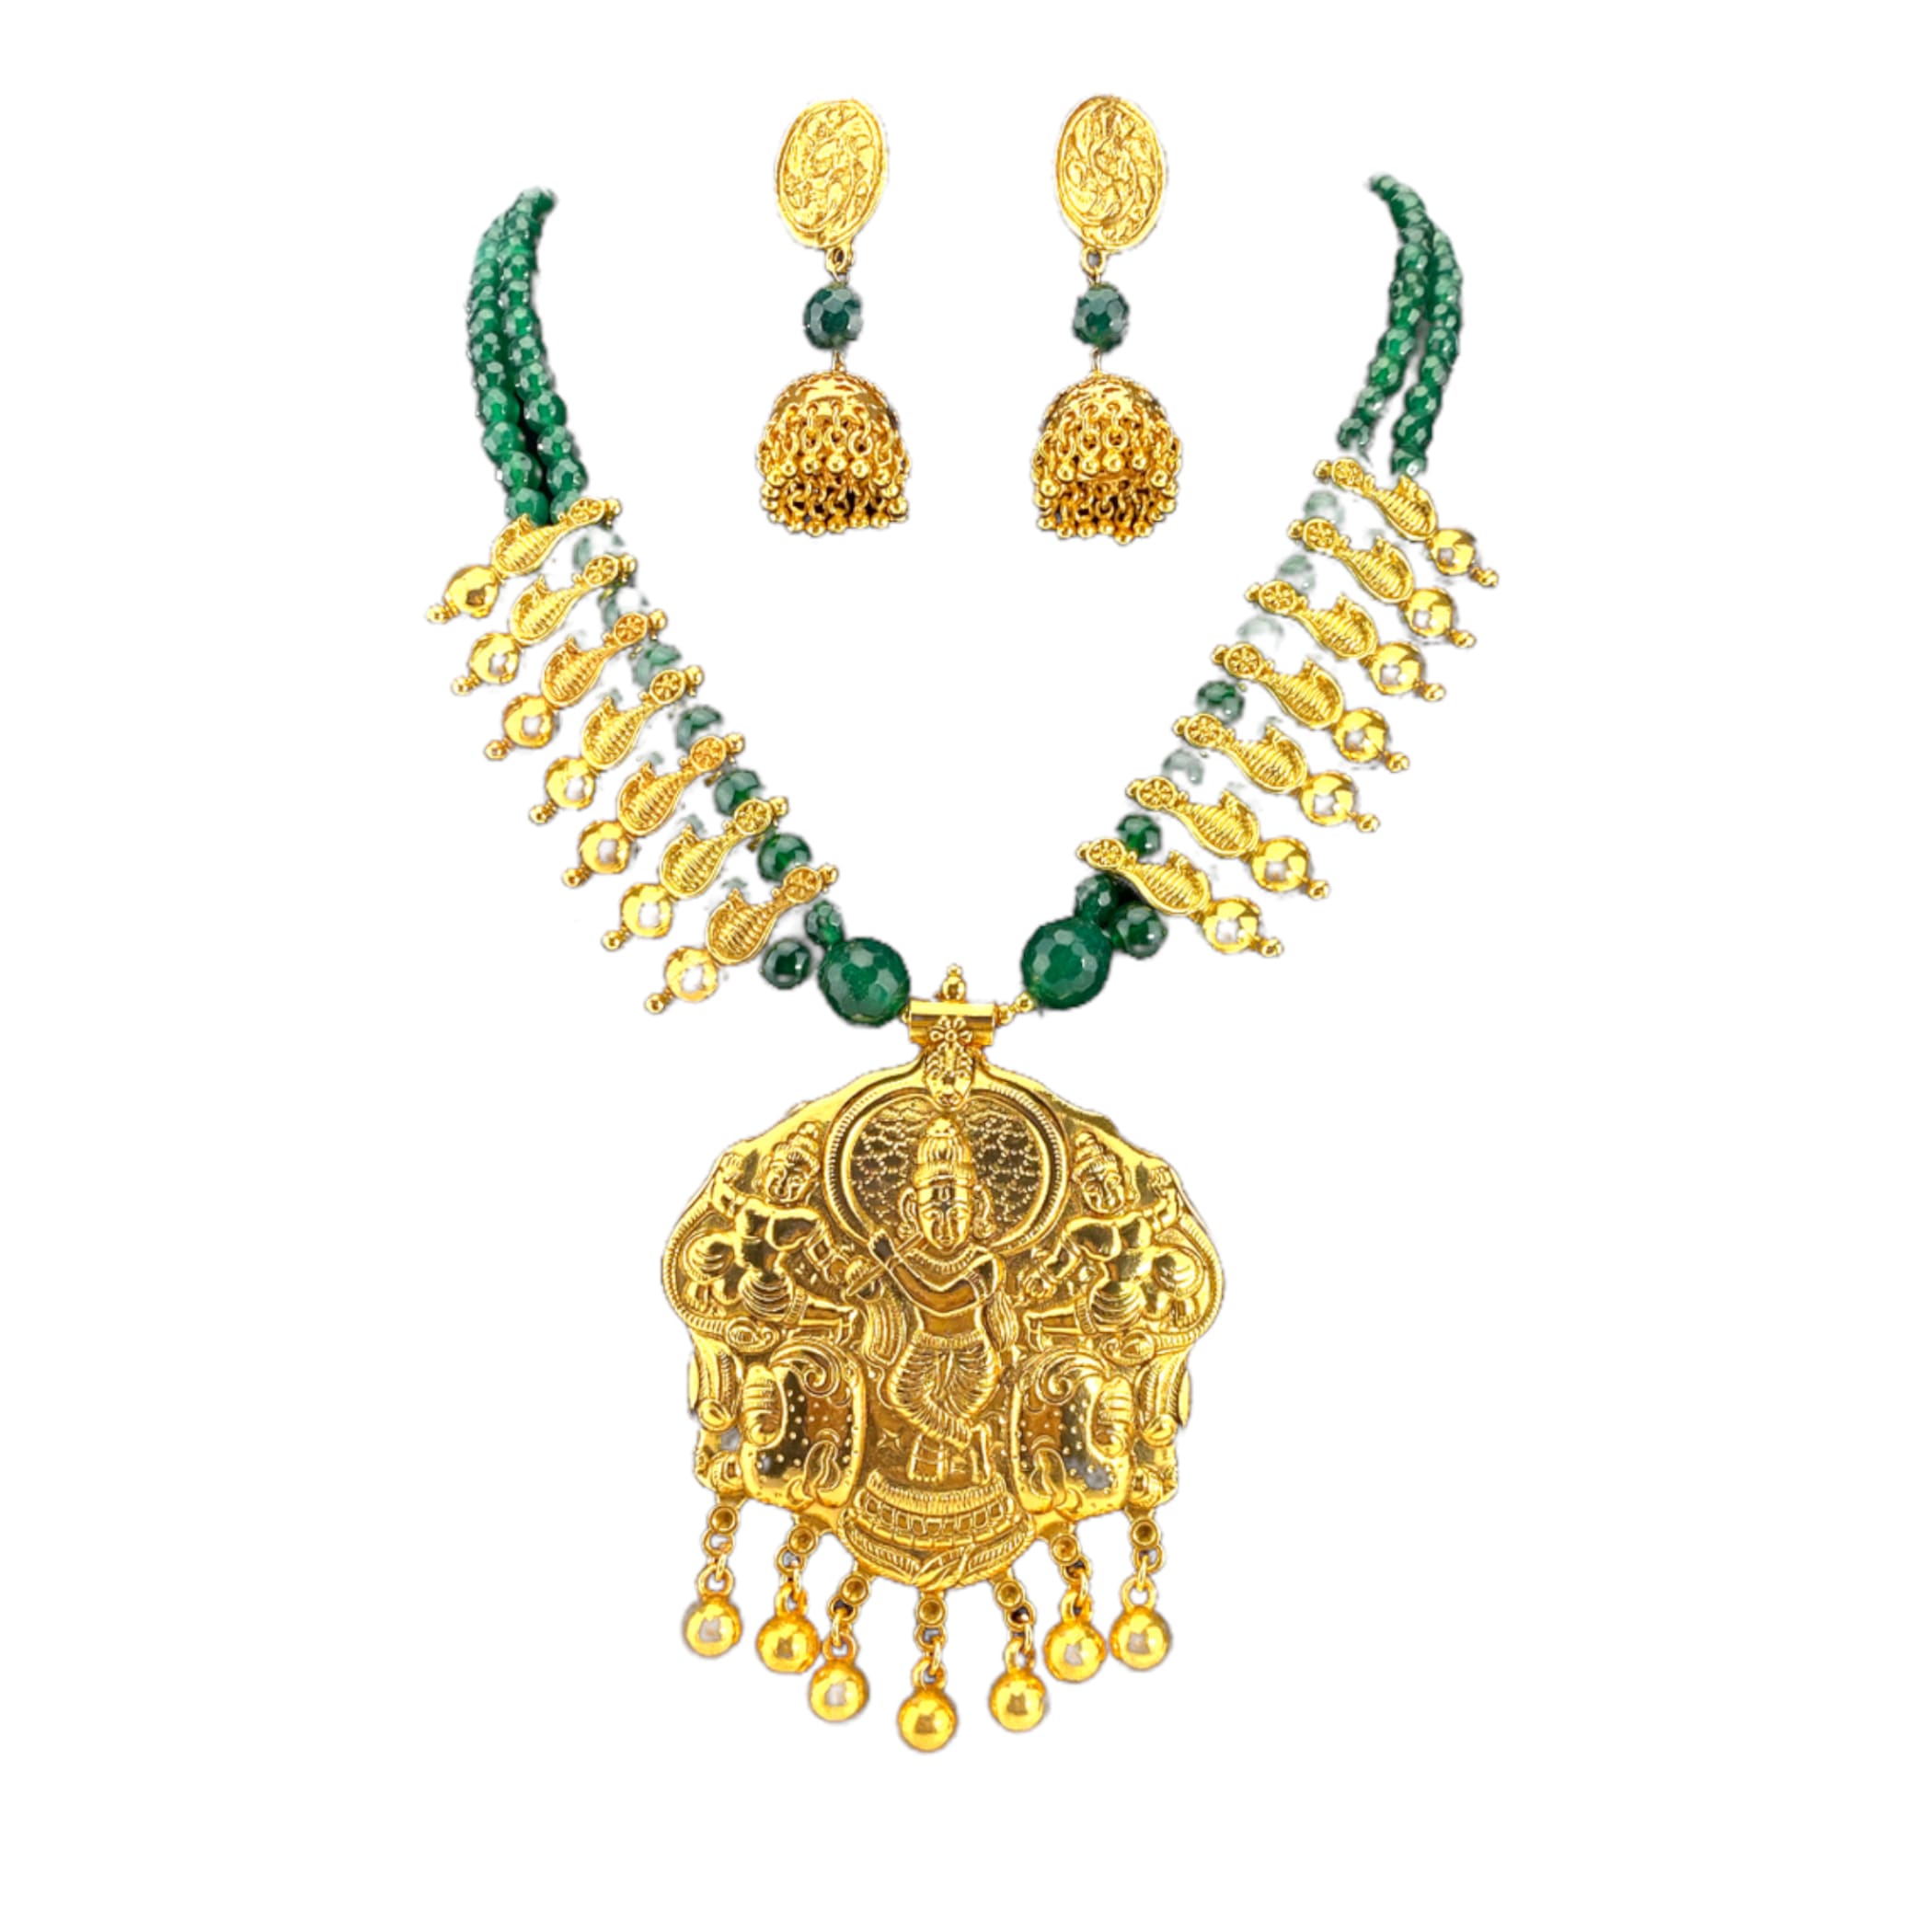 Temple jewellery full set bridal jewelry traditional matte